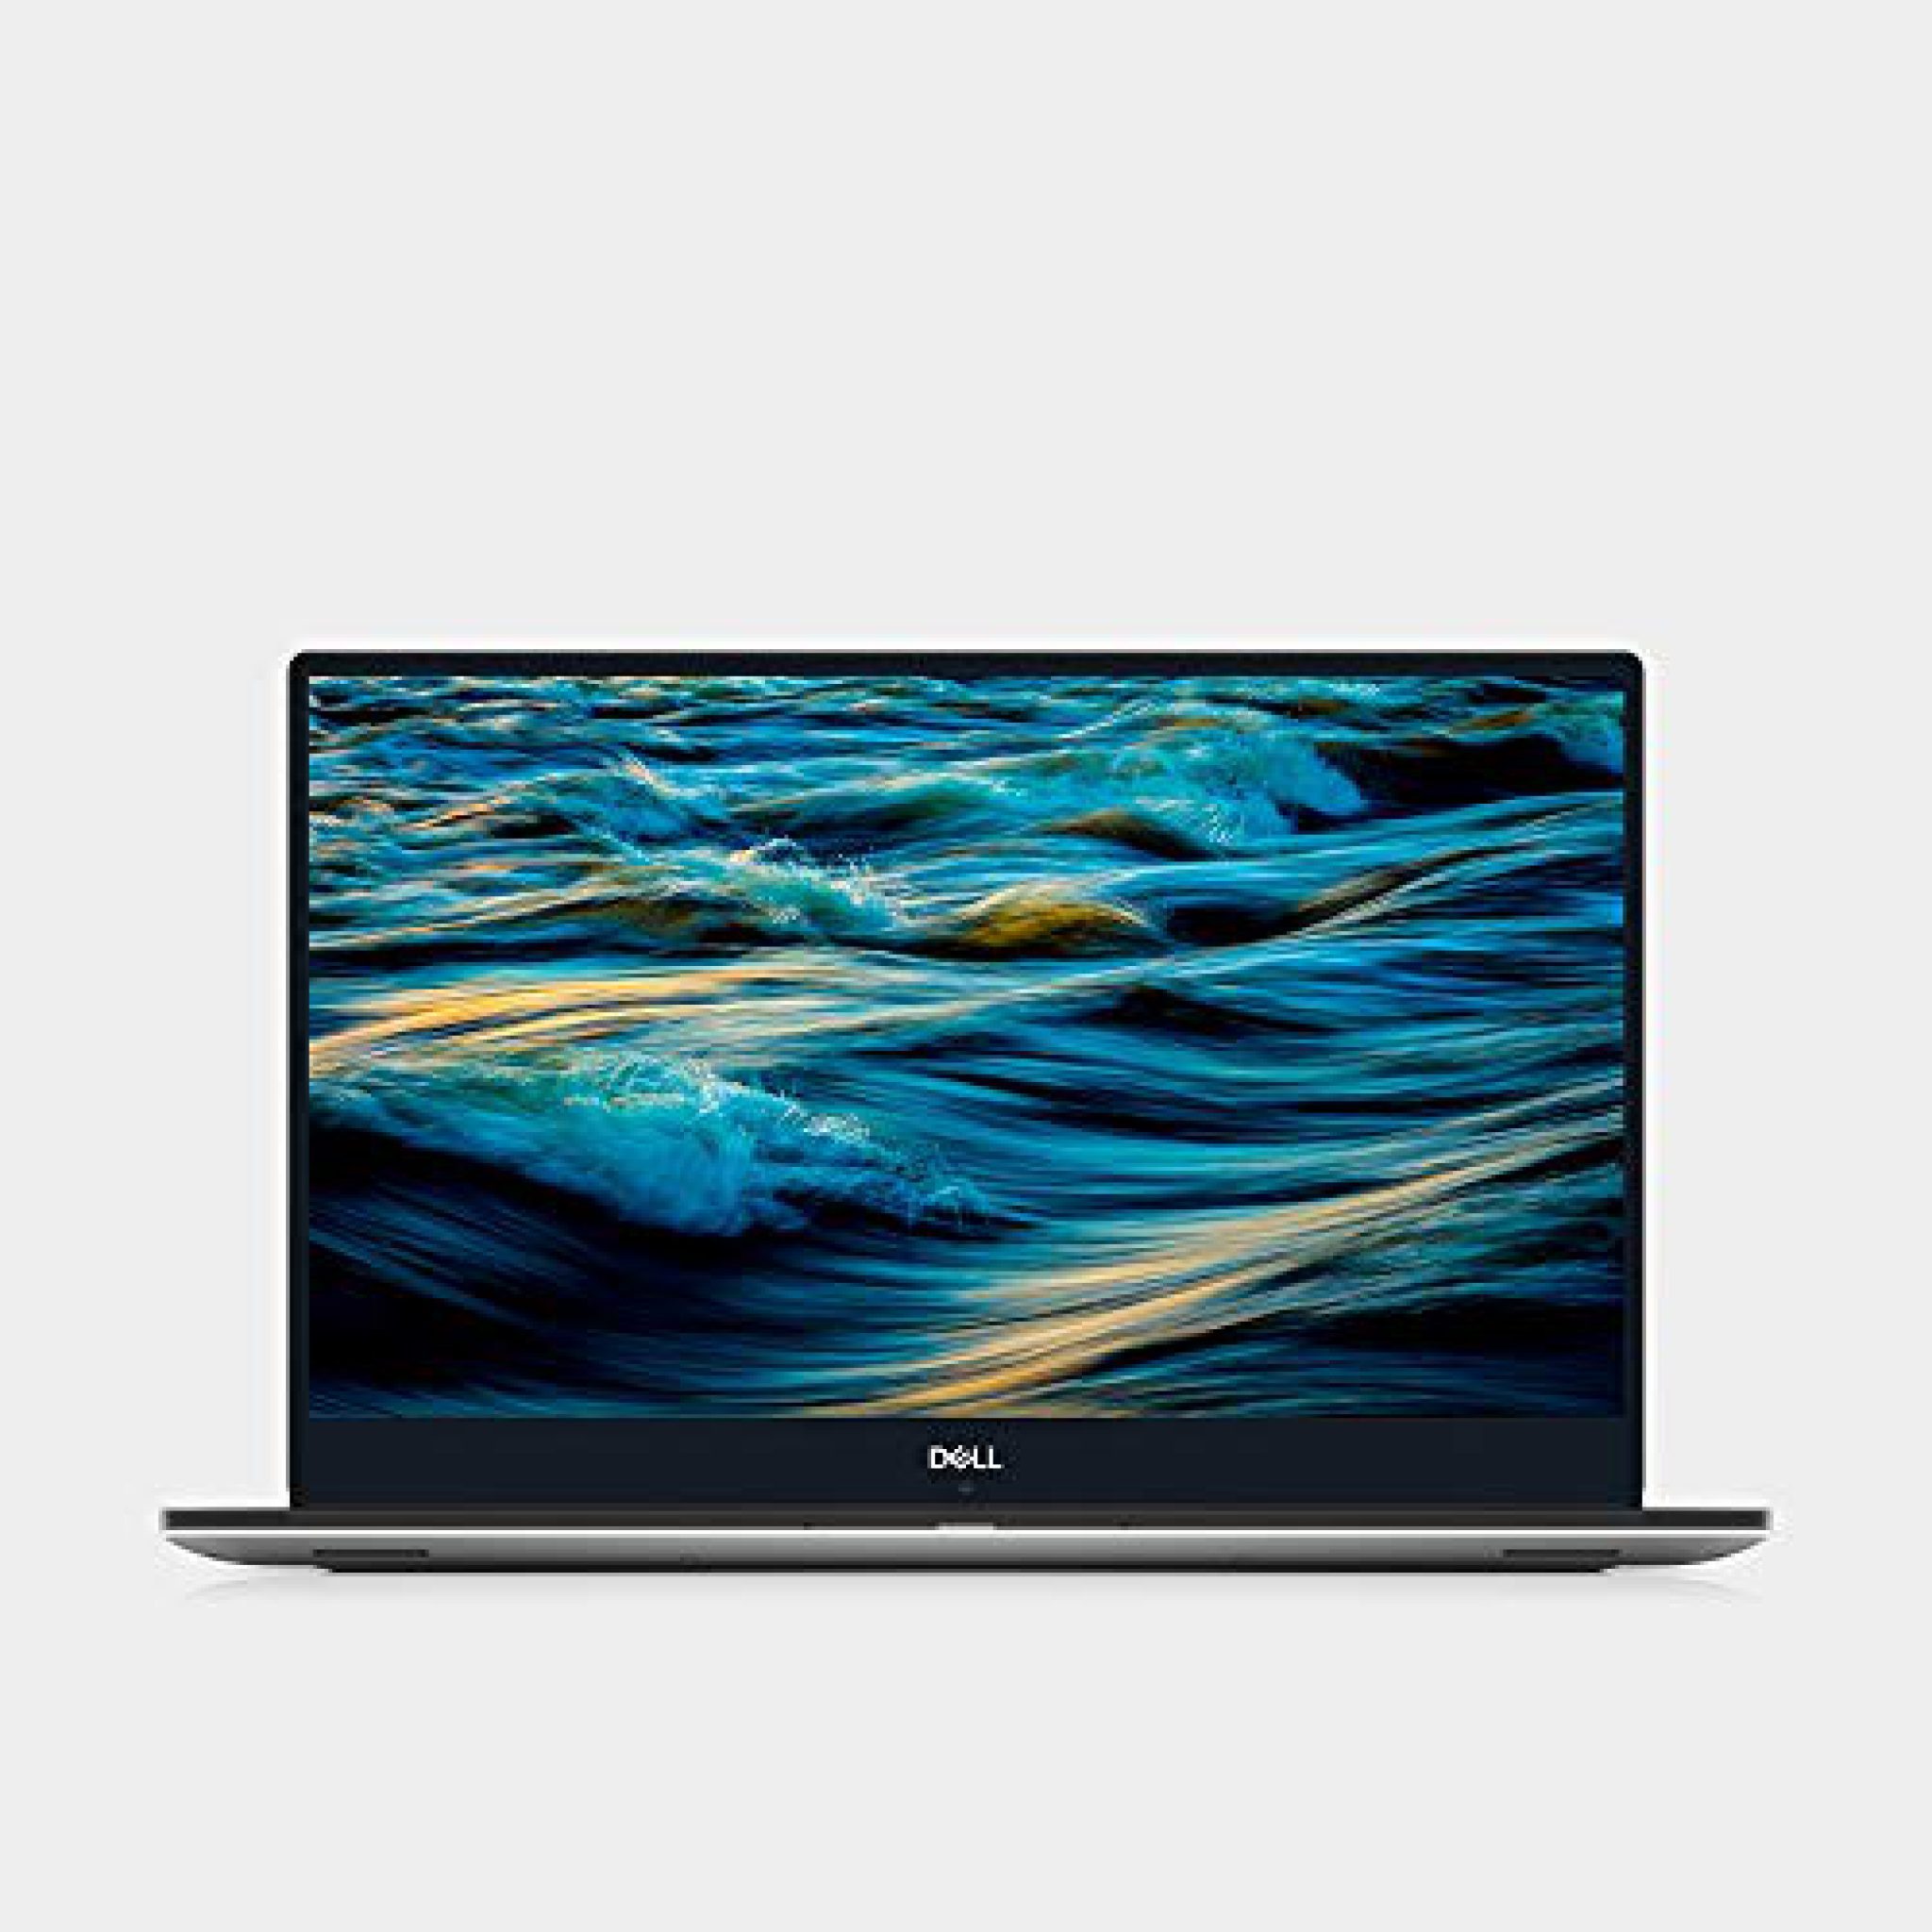 Dell Xps 9570 Review